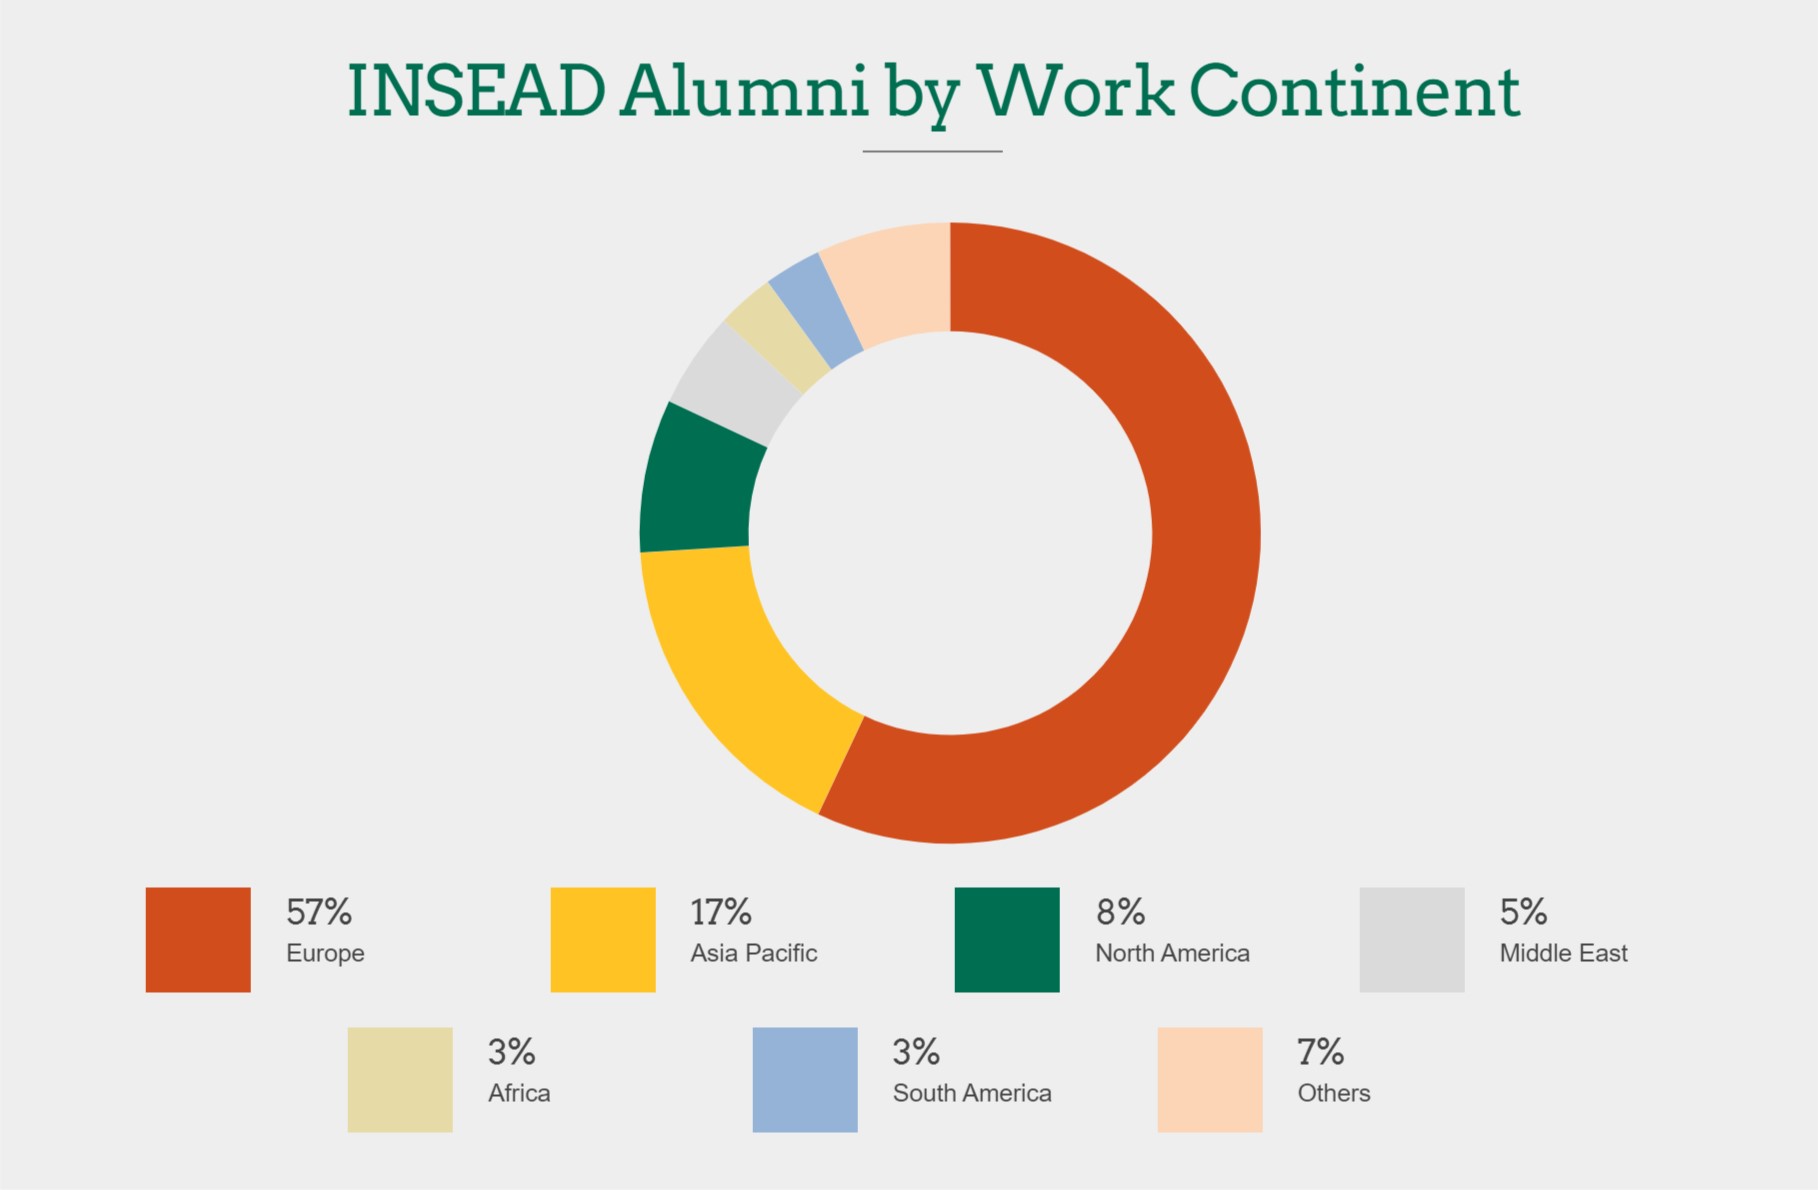 INSEAD MBA Program - Alumni Distribution by Continent